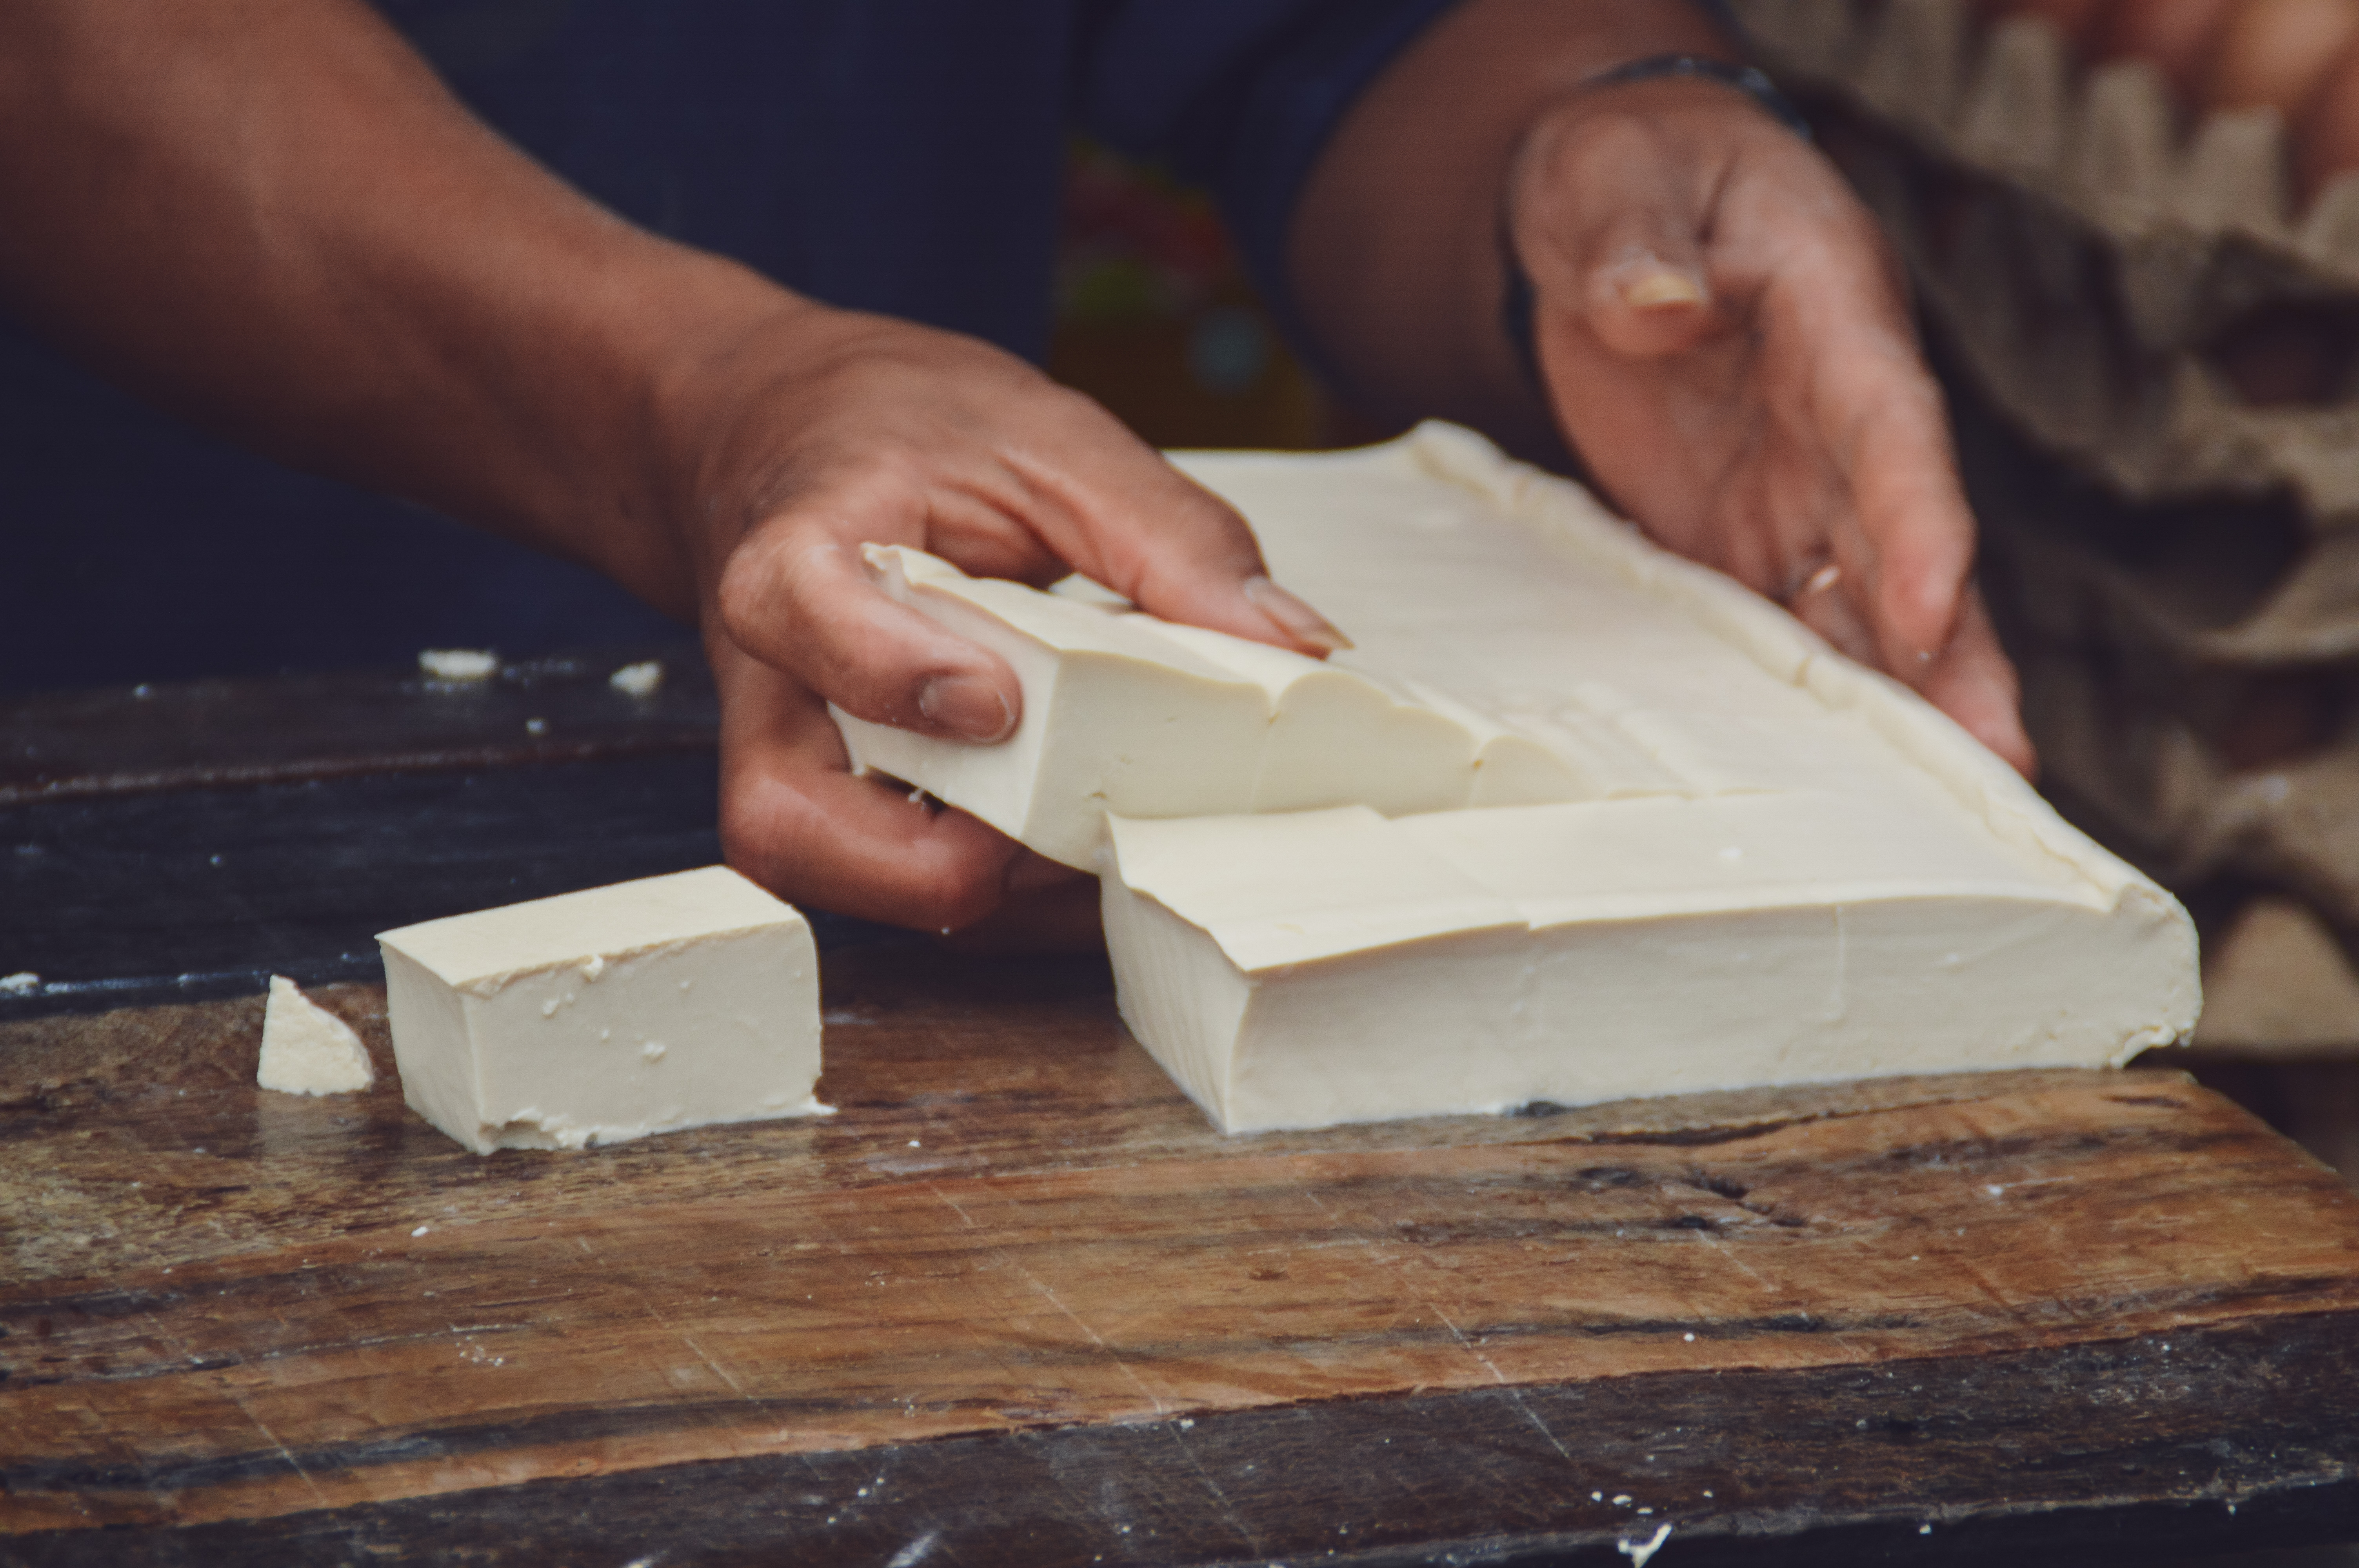 A close-up of a person’s hands as they work a fresh brick of tofu on a wooden table.